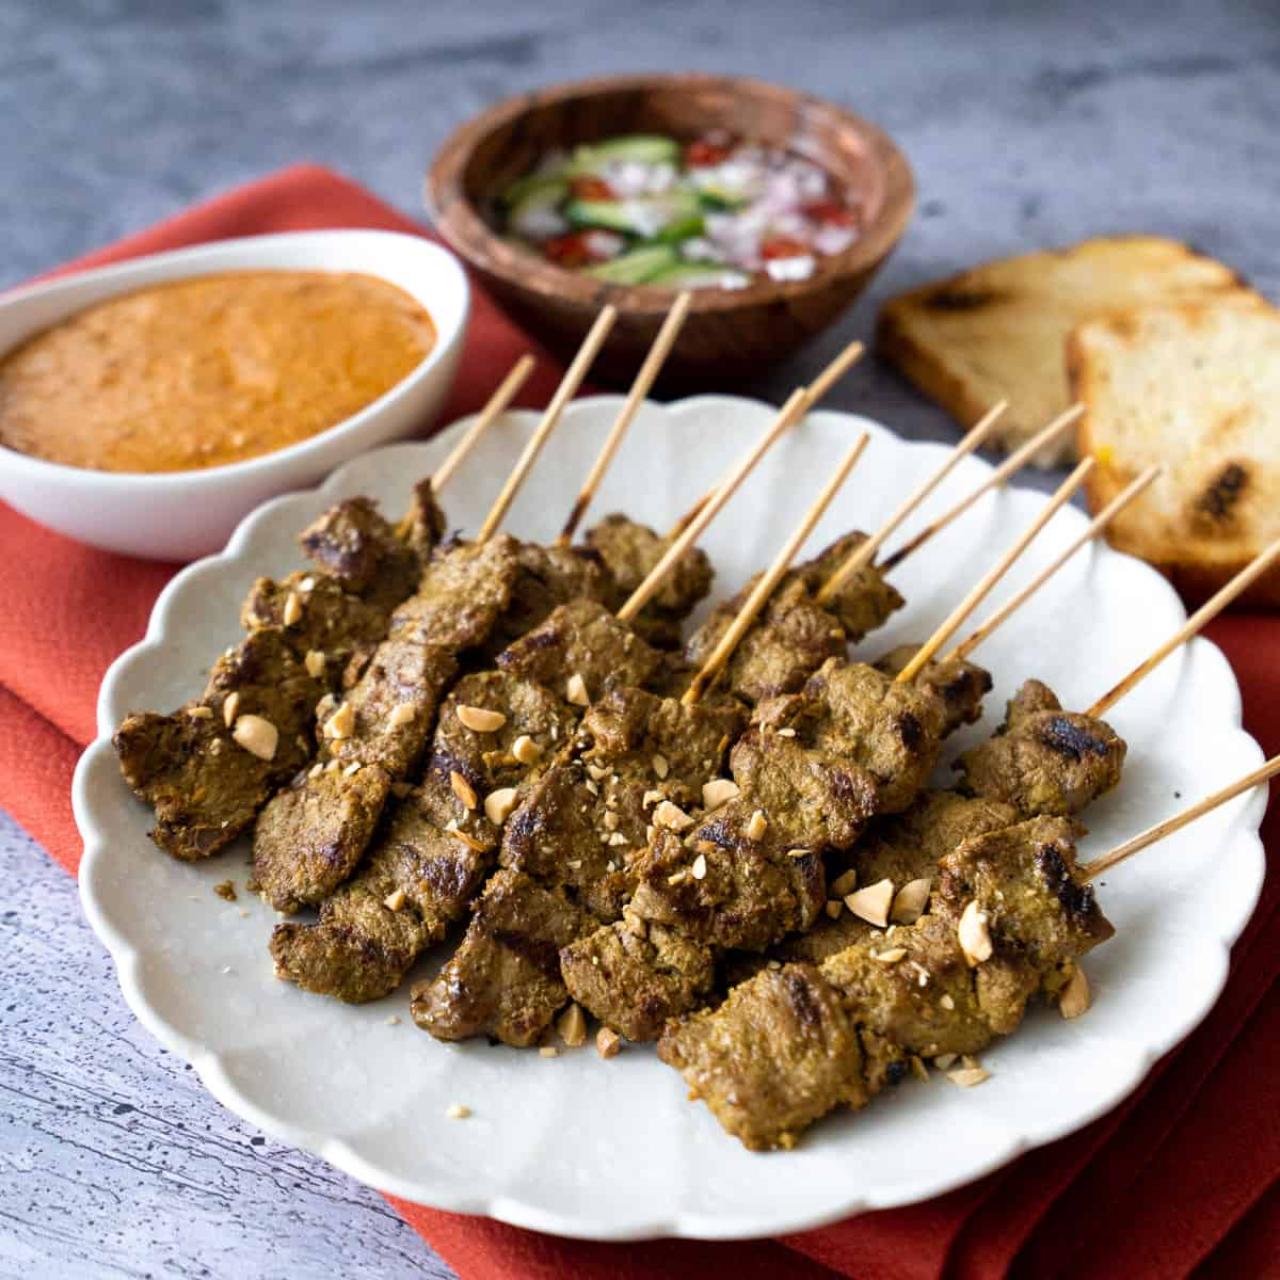 Satay: Grilled Skewered Meats with Peanut Sauce